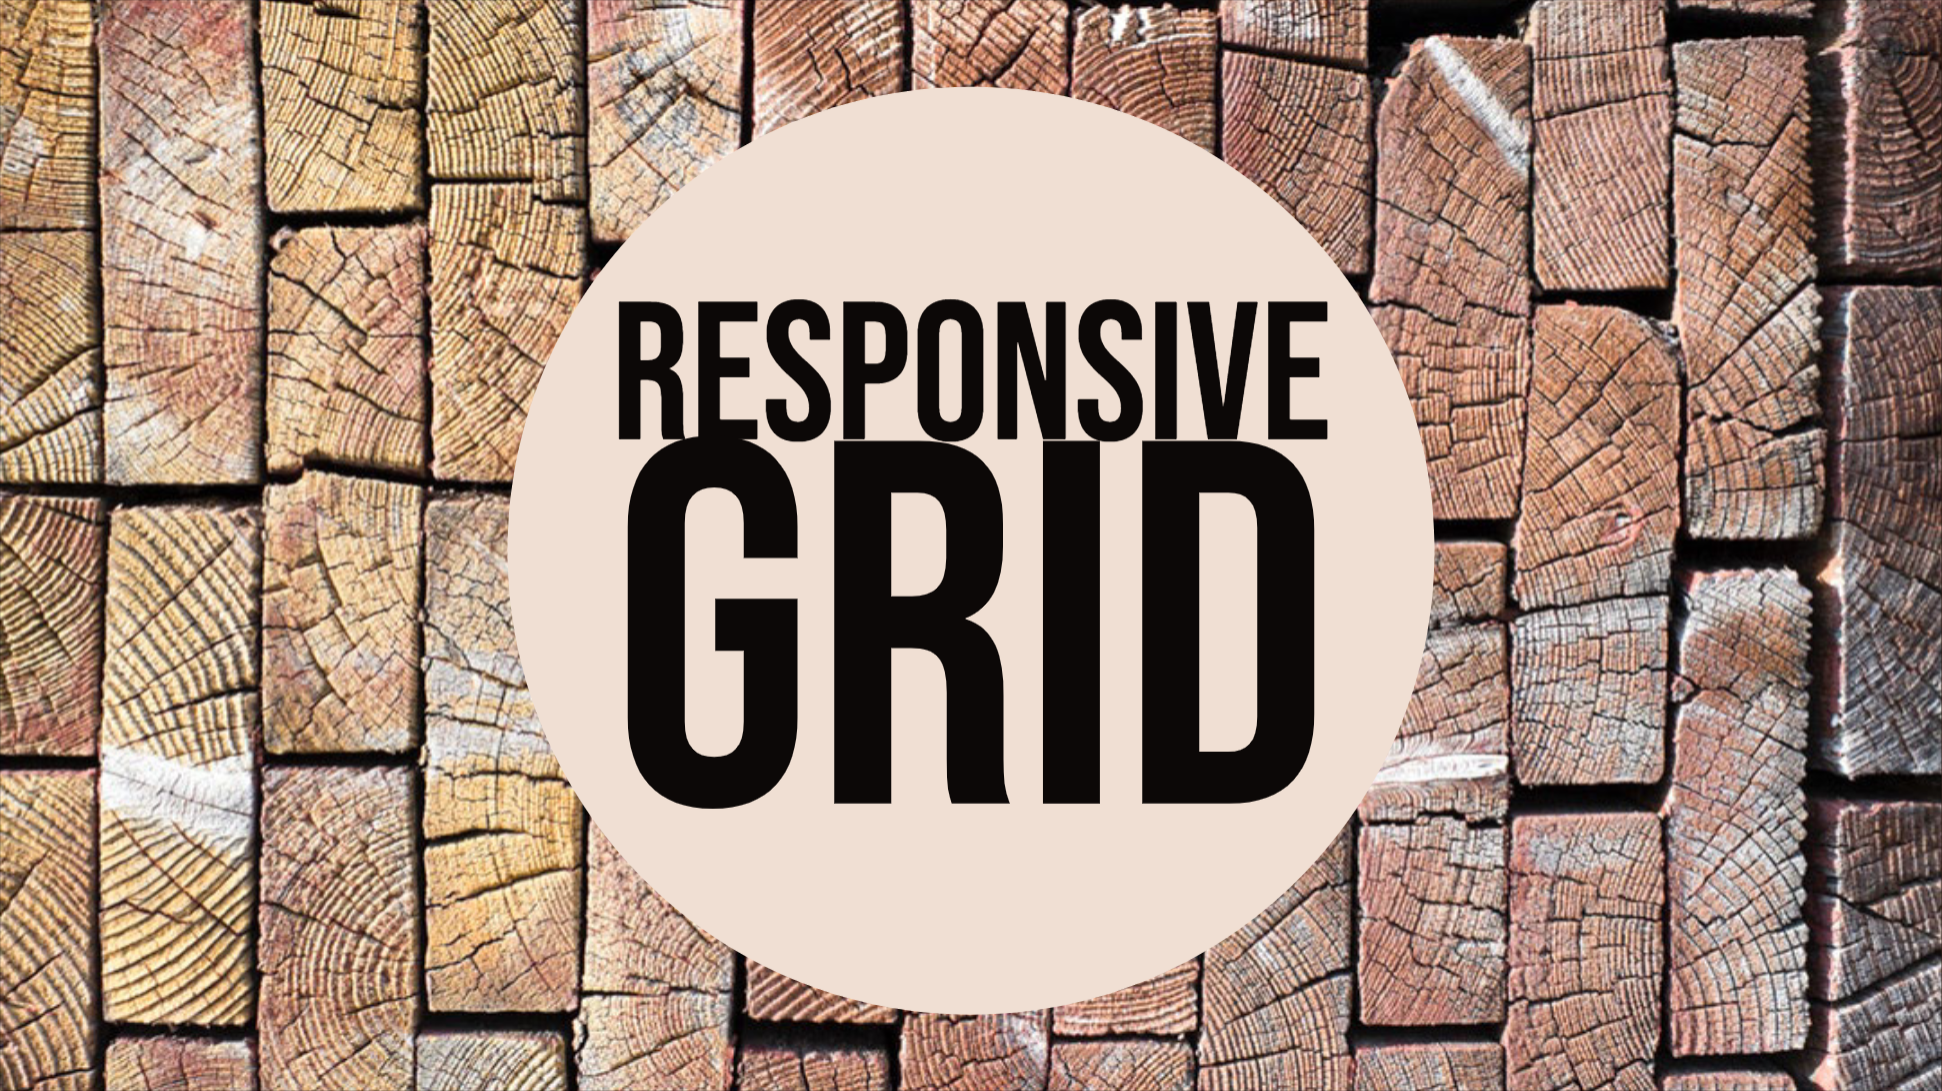 Responsive grid in 2 minutes with CSS Grid Layout